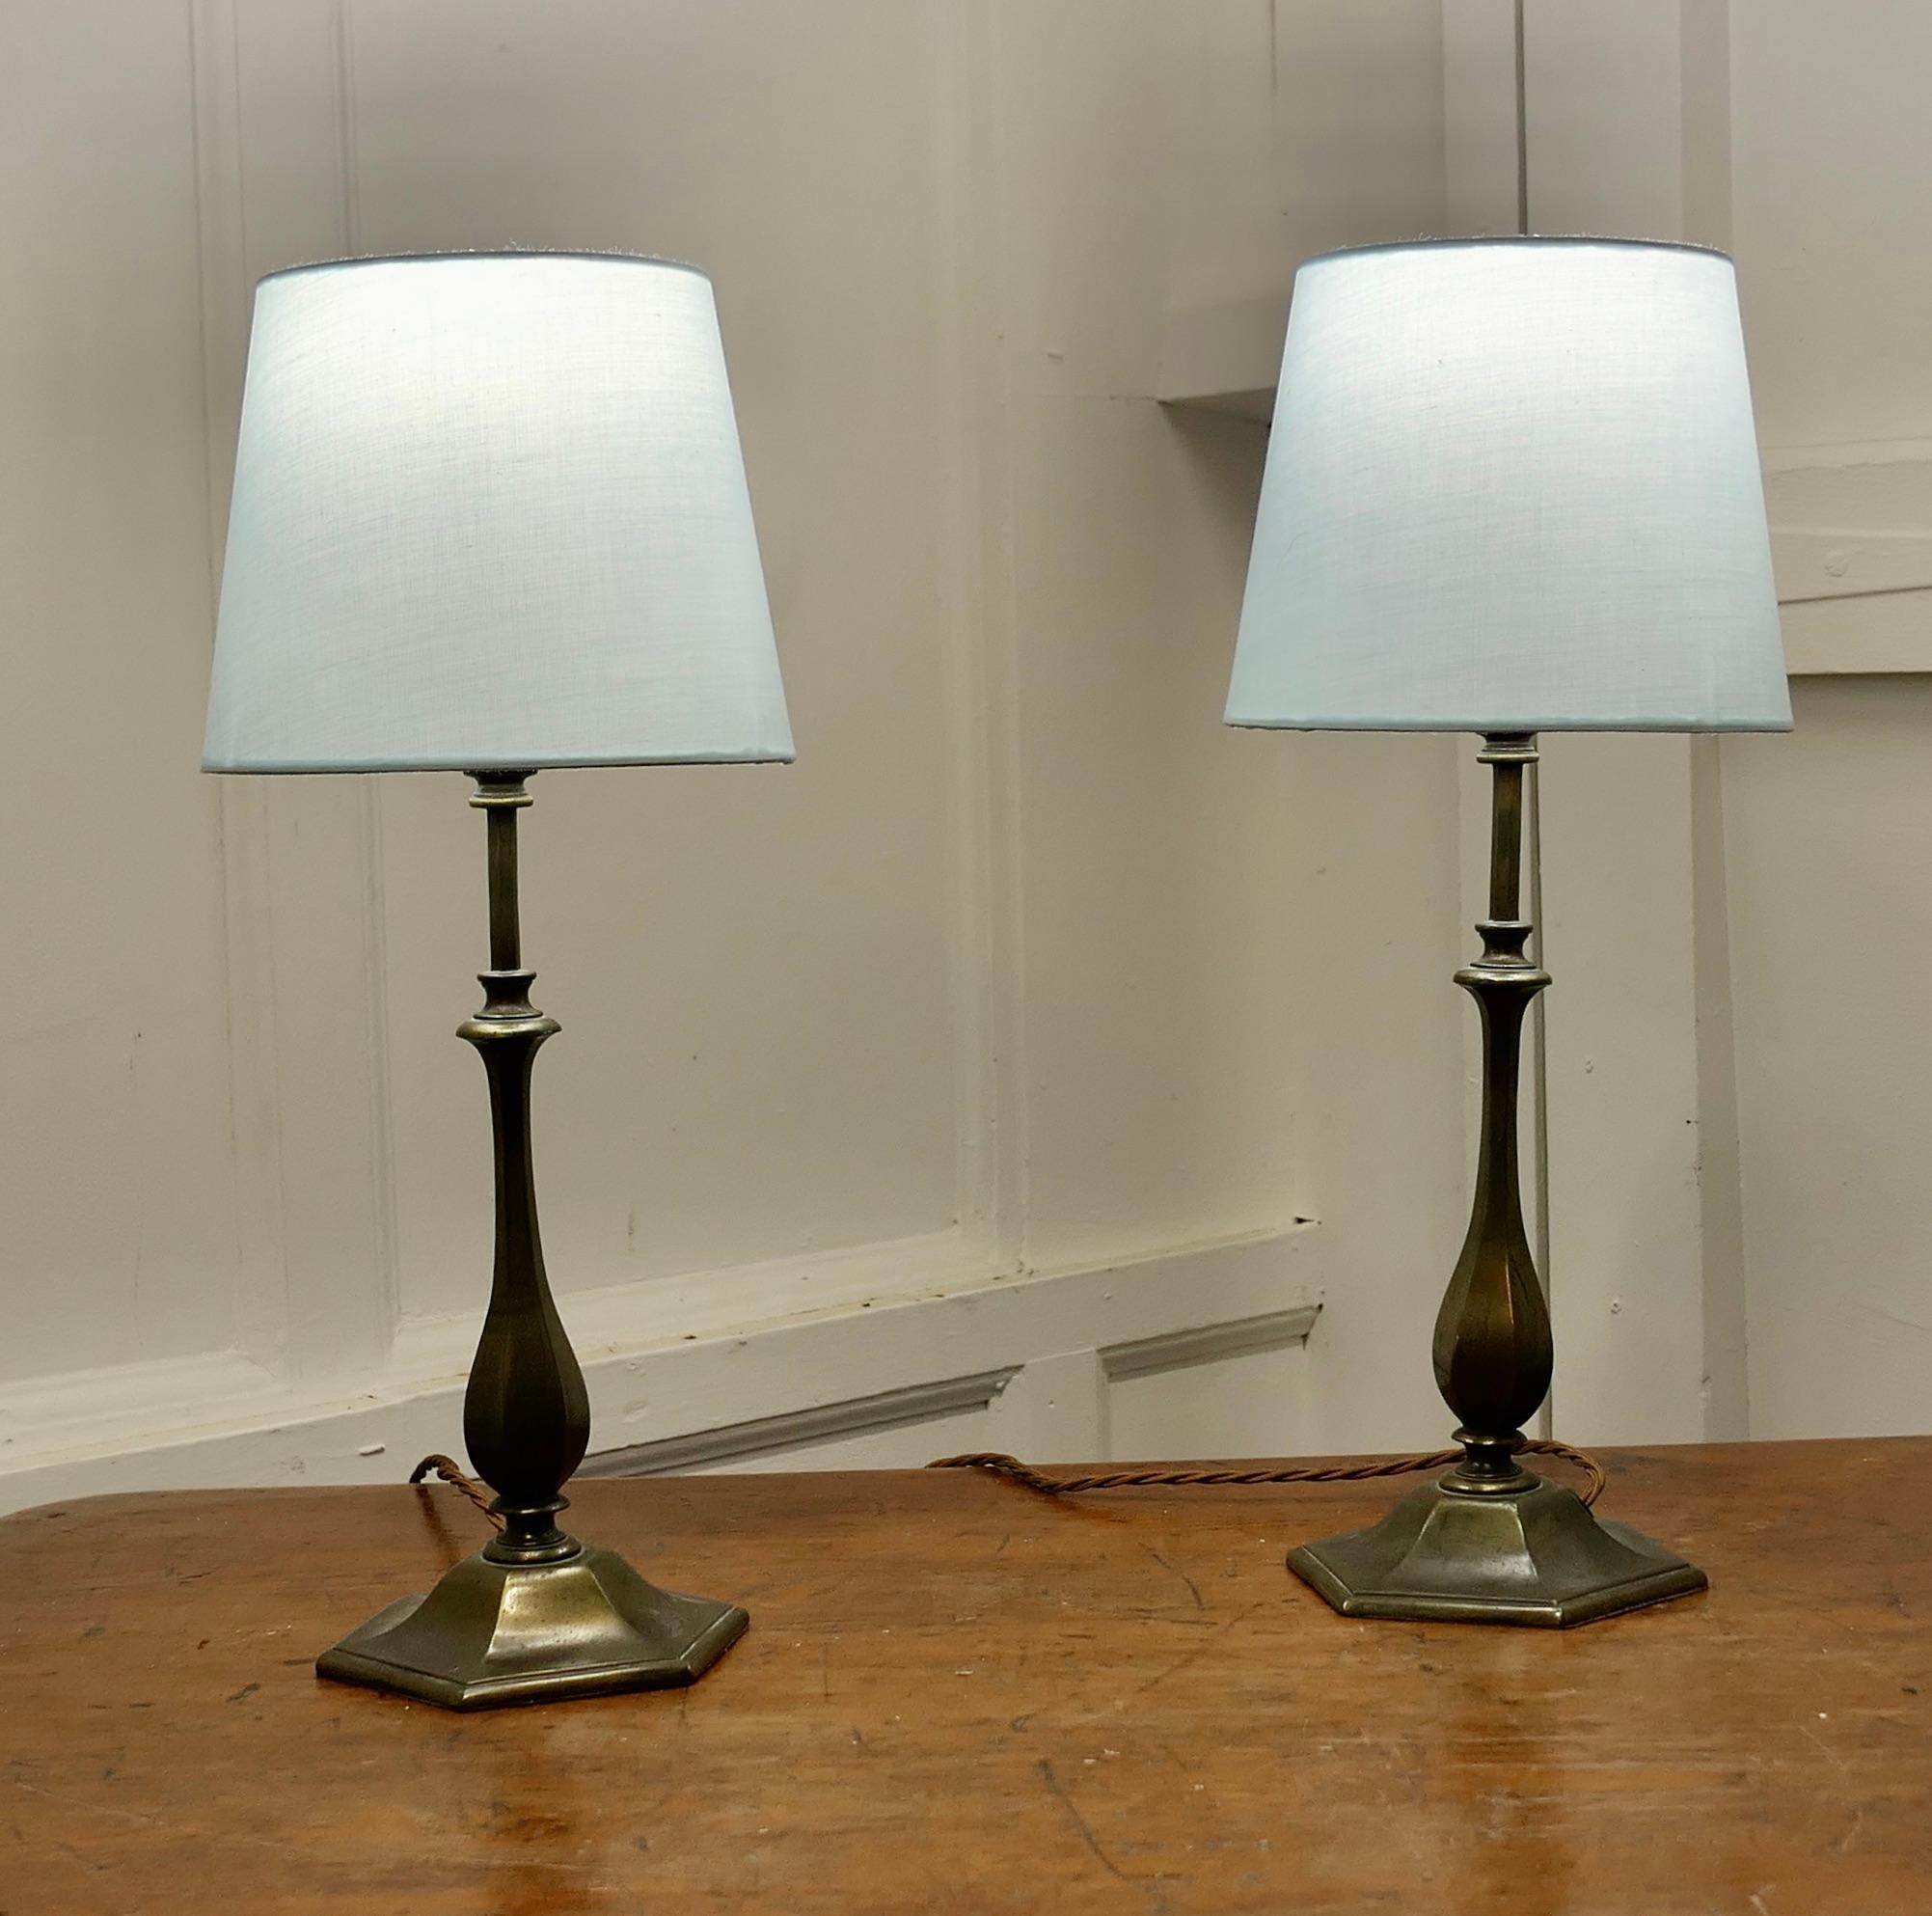 Pair of  Art Deco Style Brass Table Lamps

These are a very stylish pair of lamps, the are made in age darkened brass
The lamps can come with the shades if requested the wiring is new and they are in good condition
The Lamps are 14.5” tall they